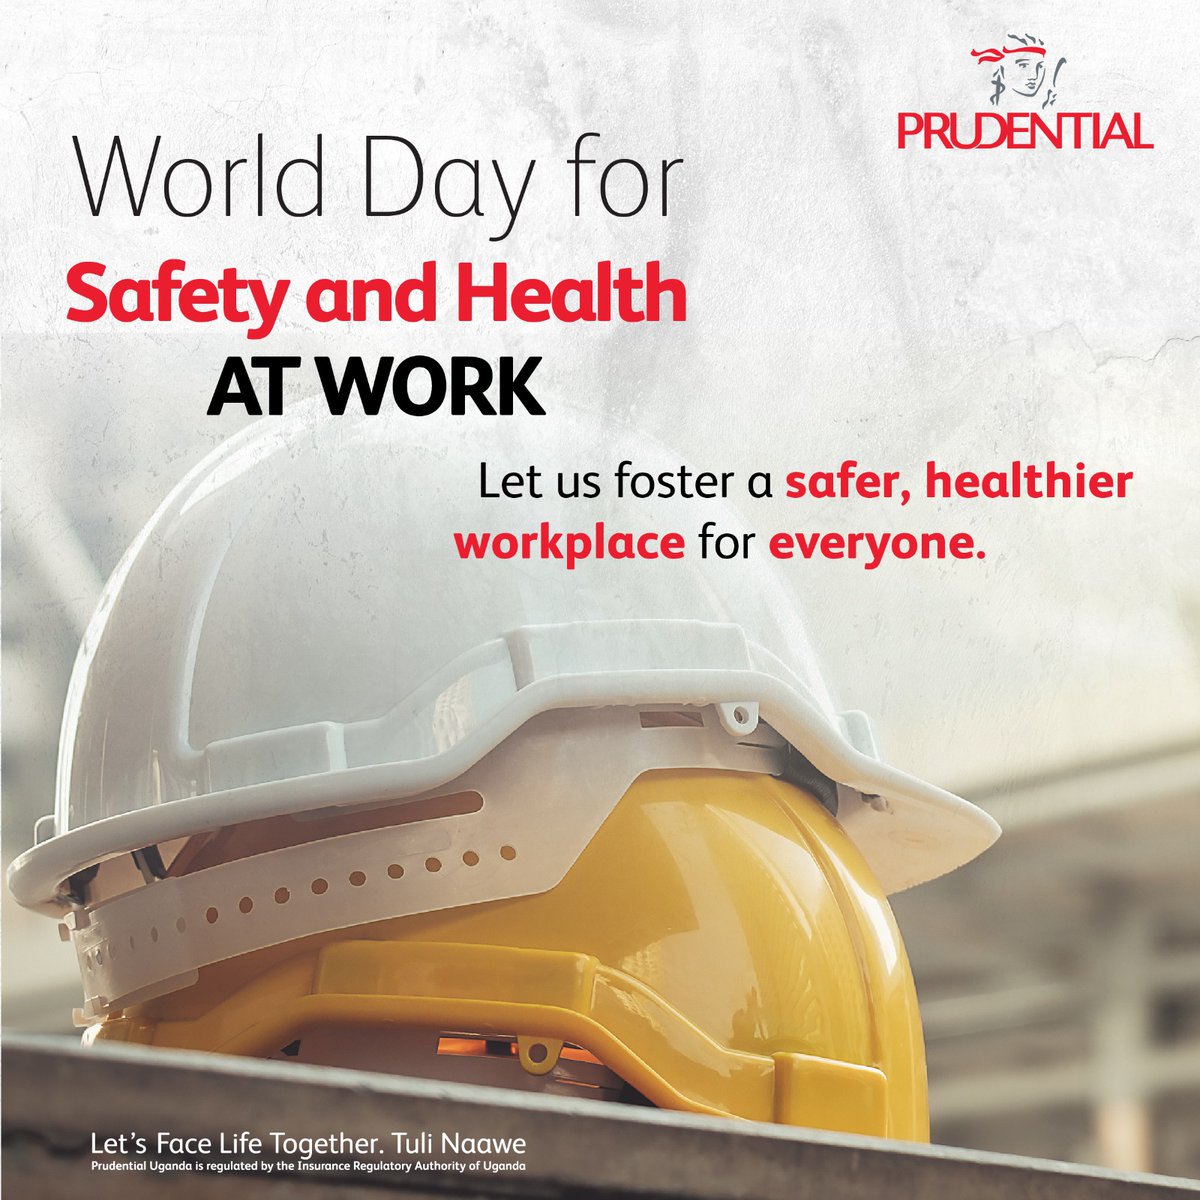 Commencing this week on World Day for Safety and Health at Work, let's dedicate our efforts to fostering a safer, healthier workplace for everyone. 

Let's Face Life Together, ensuring that every day is a step towards a safer and healthier tomorrow.

#WorldDayForSafetyAndHealth